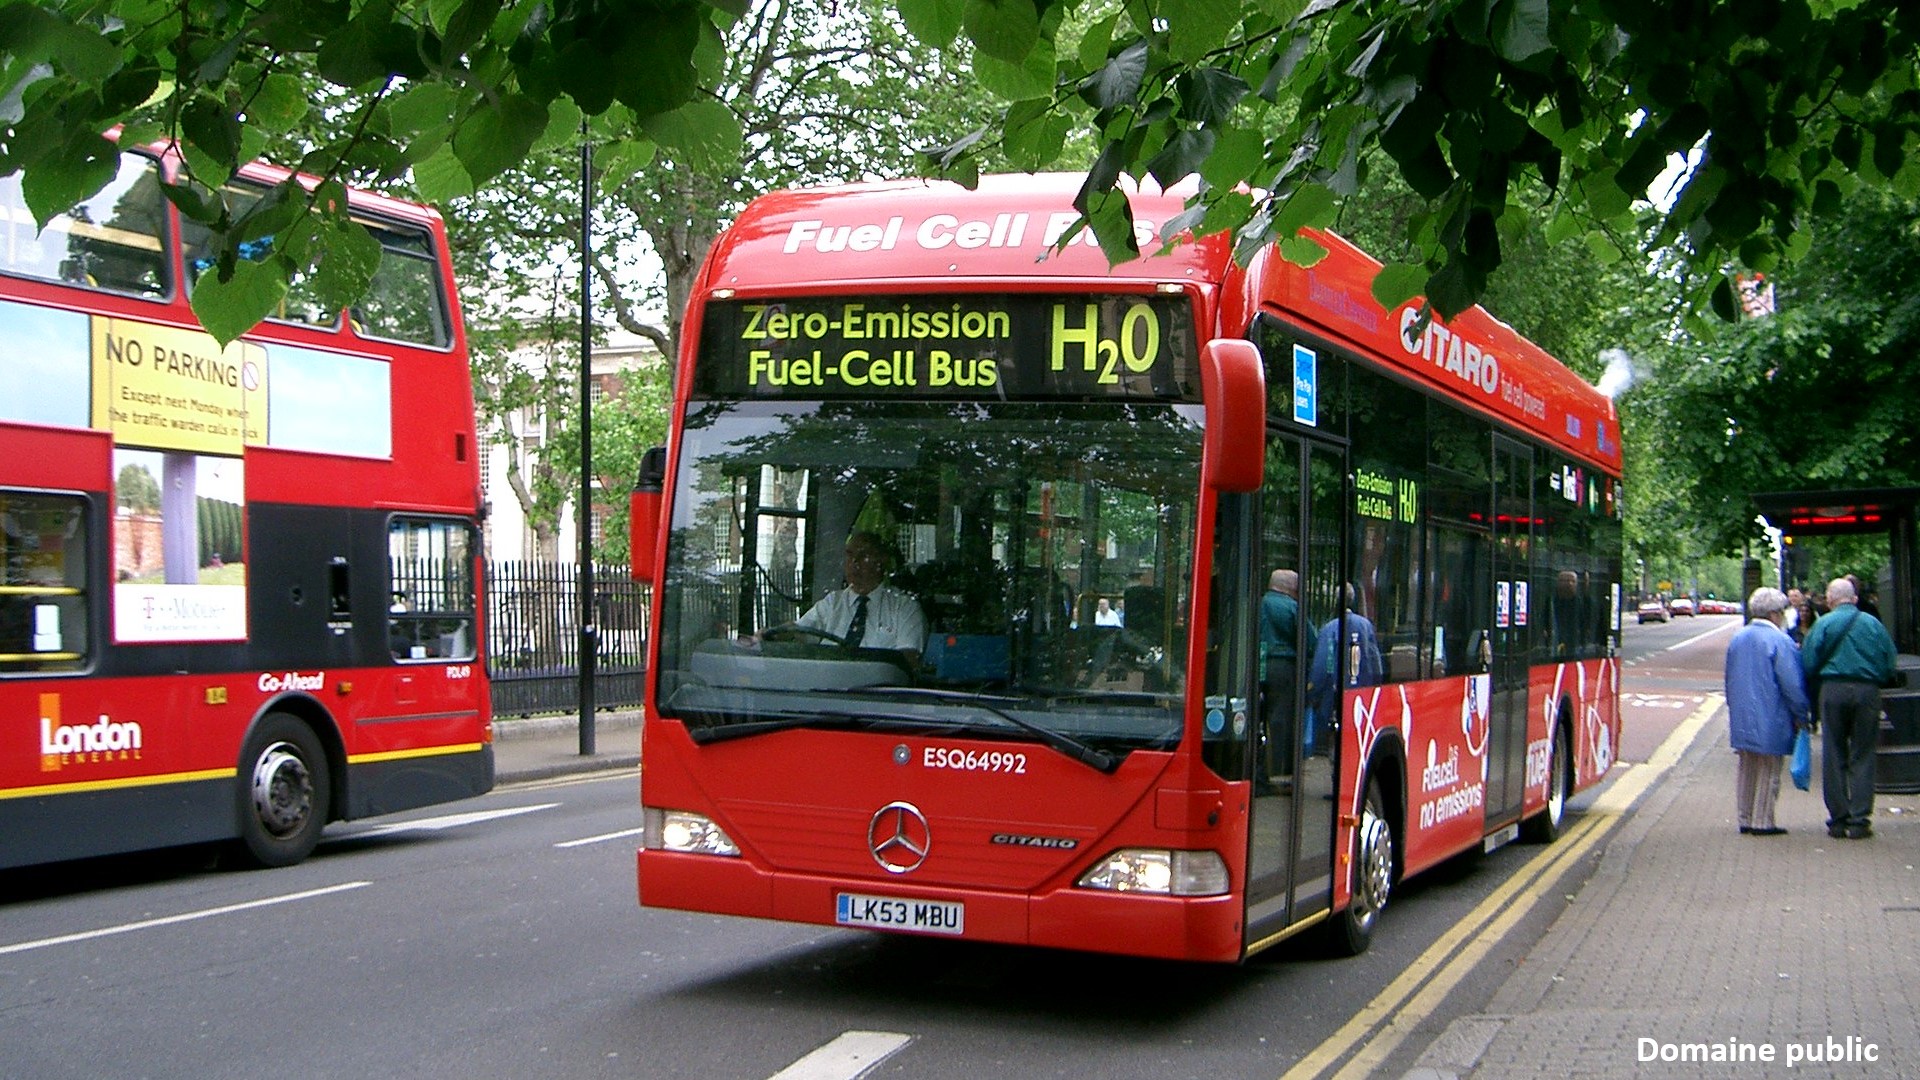 Hydrogen fuel cell bus, London, England.